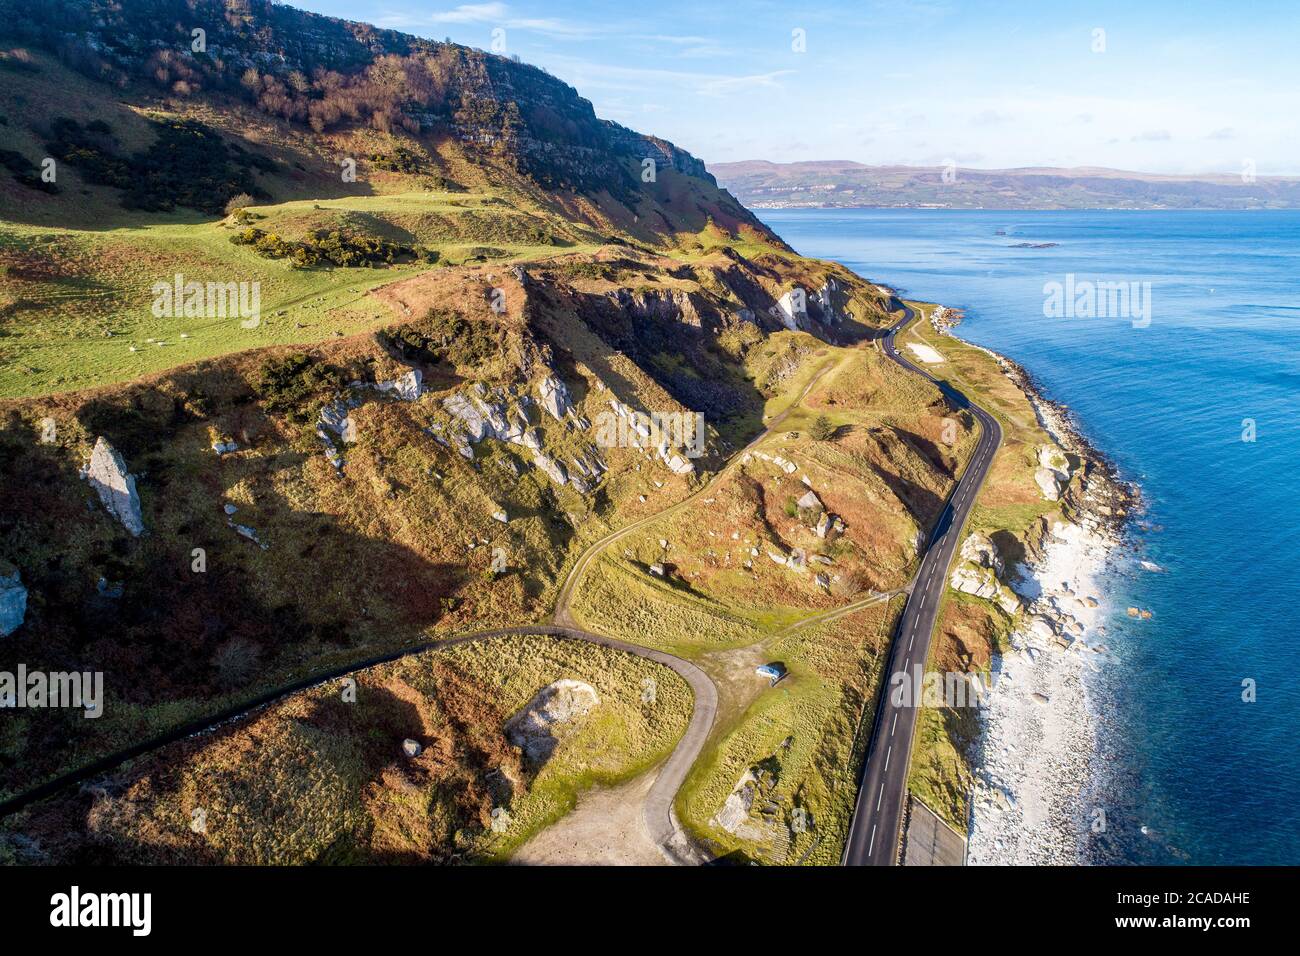 Atlantic coast in Northern Ireland, Causeway Coastal Route a.k.a Antrim Coast Road A2. One of the most scenic coastal roads in Europe. Aerial view in Stock Photo